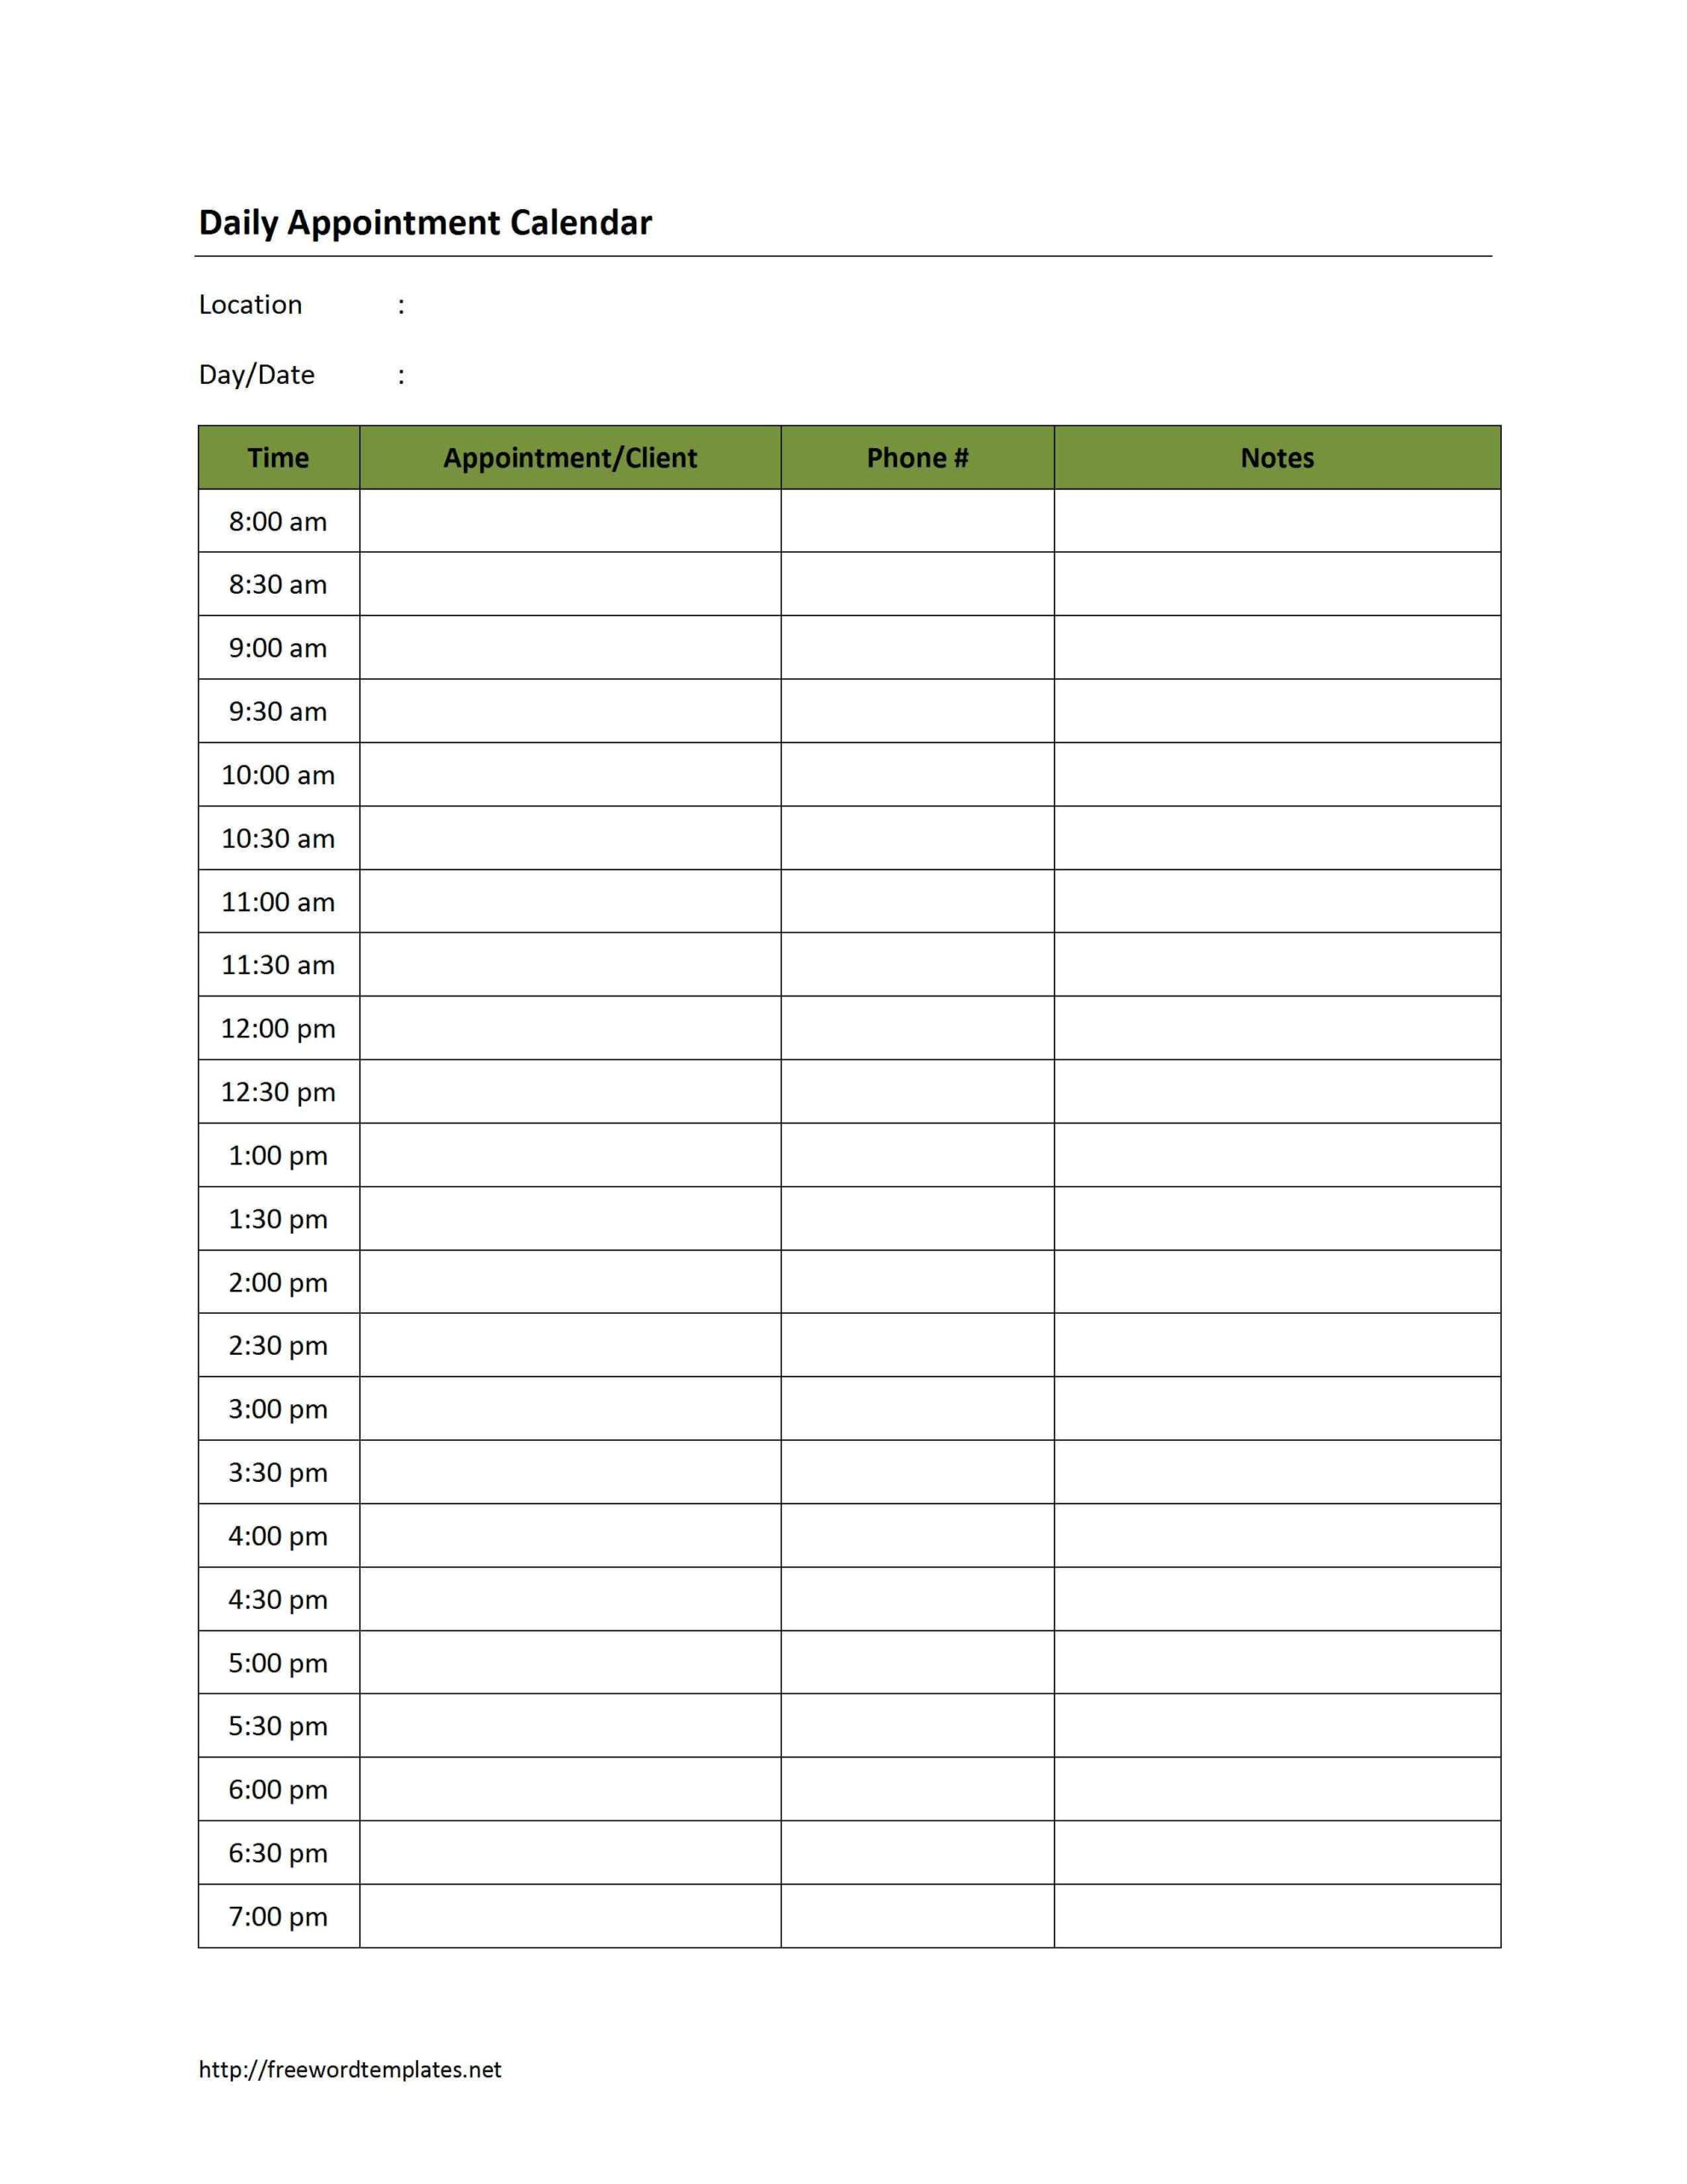 daily appointment calendar template | appointment calendar